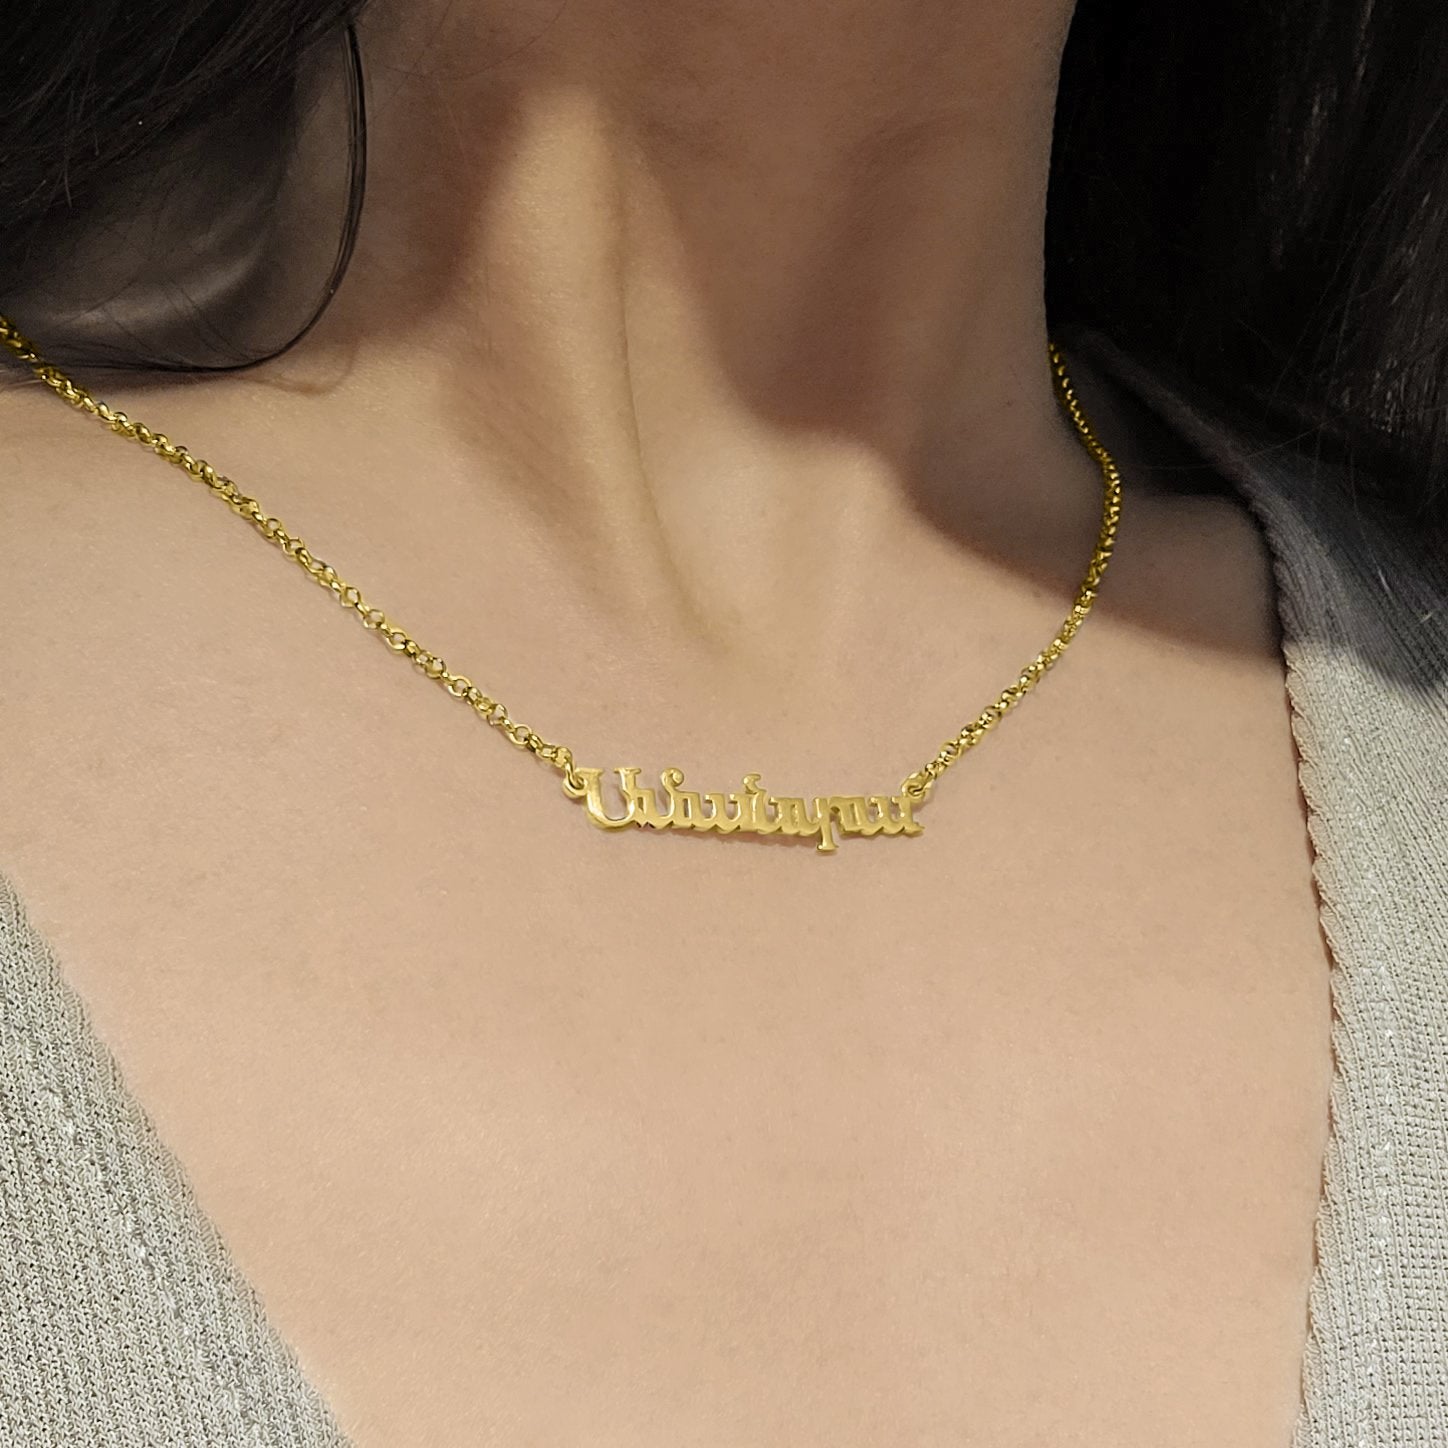 Amanda Nameplate Necklace in Armenian Language made in Solid 10KT Gold